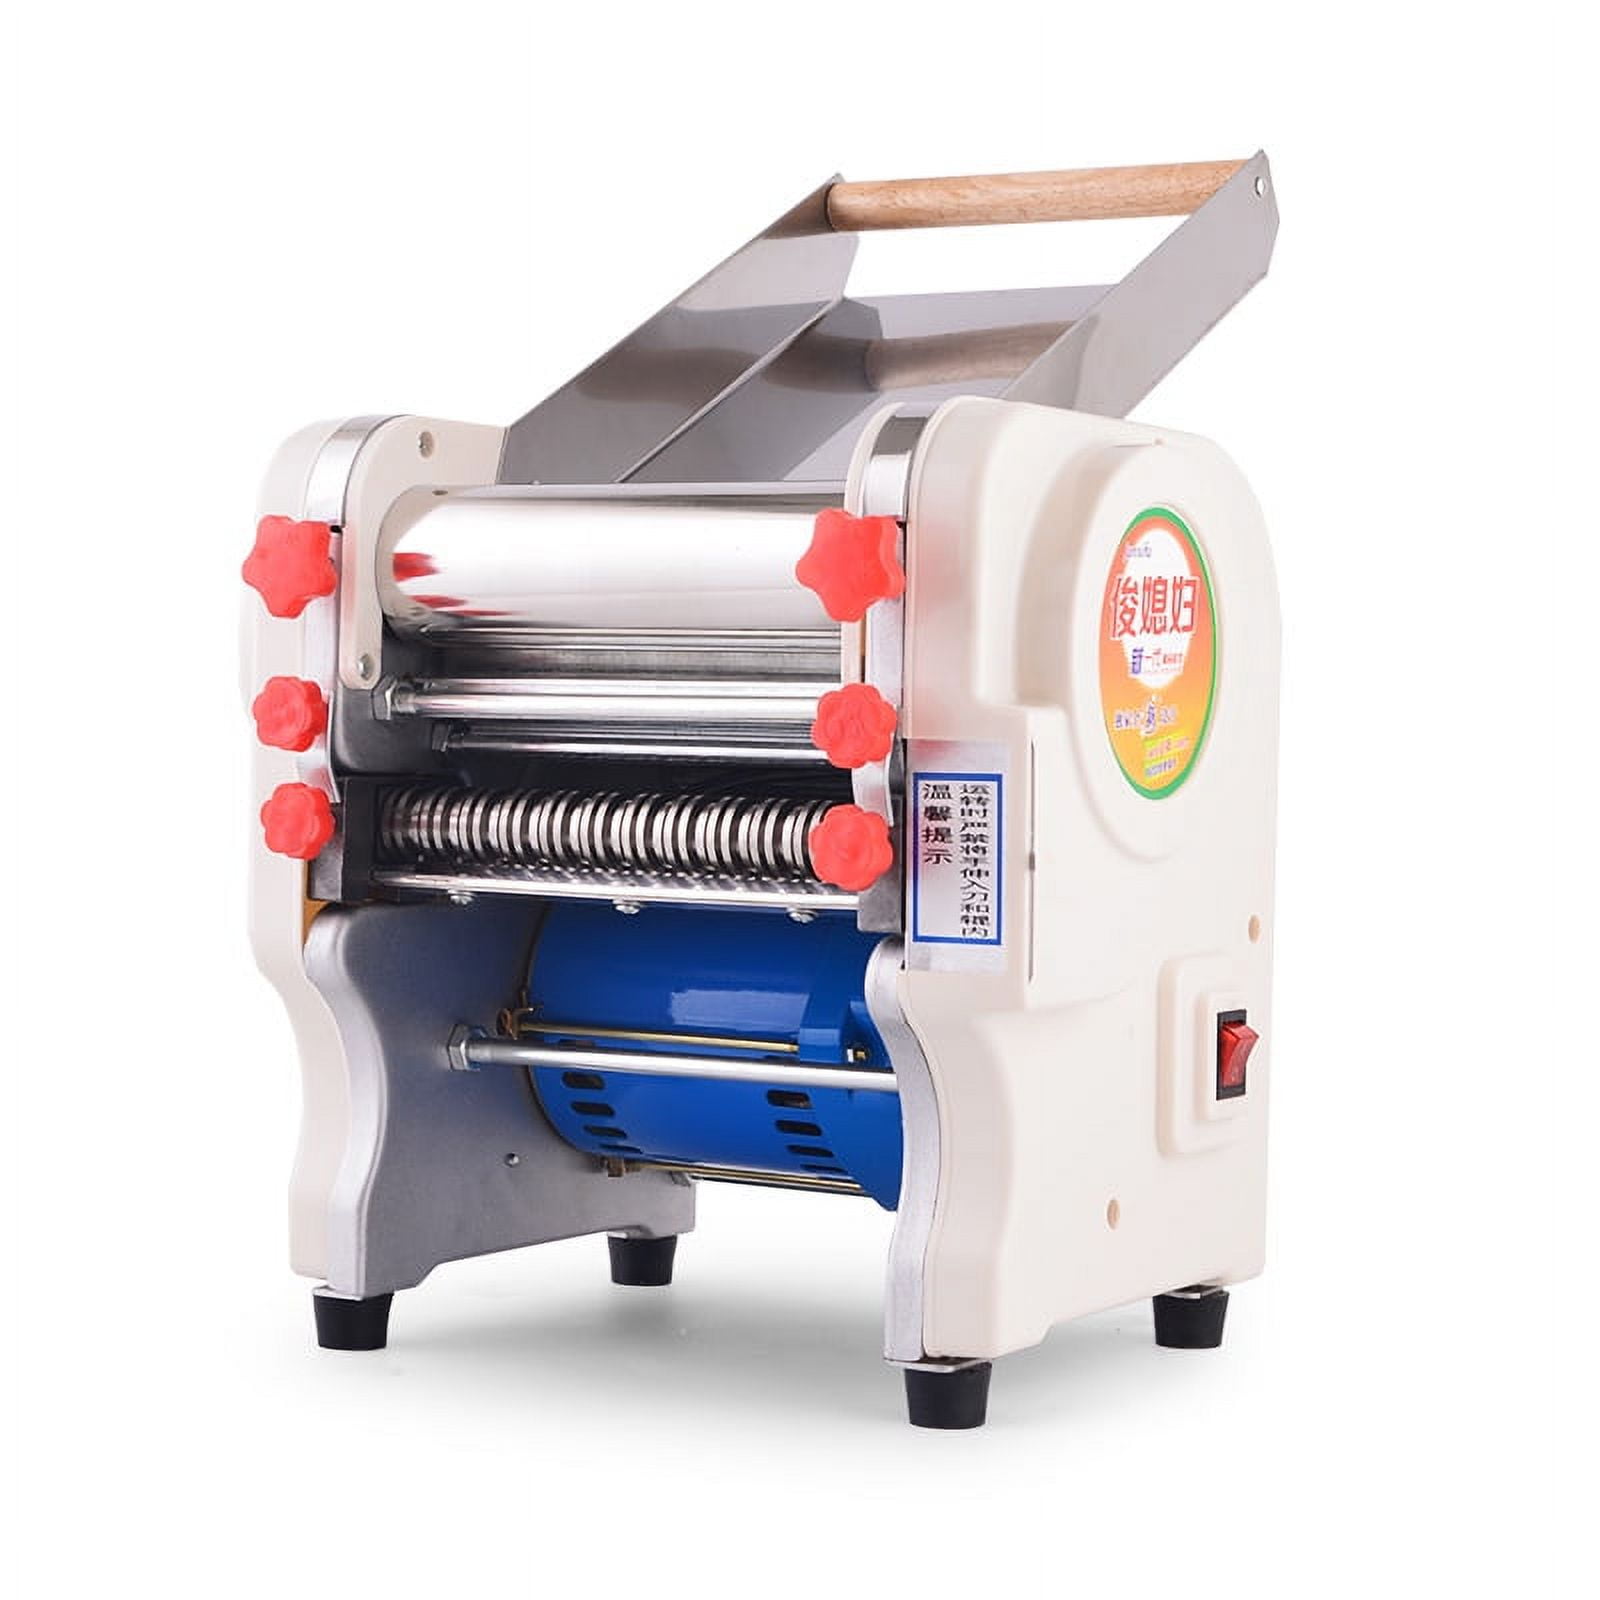 30Kg Per Hour Stainless Steel Commercial Fresh Noodle Maker Machine  TT-D30A-1 Chinese restaurant equipment manufacturer and wholesaler